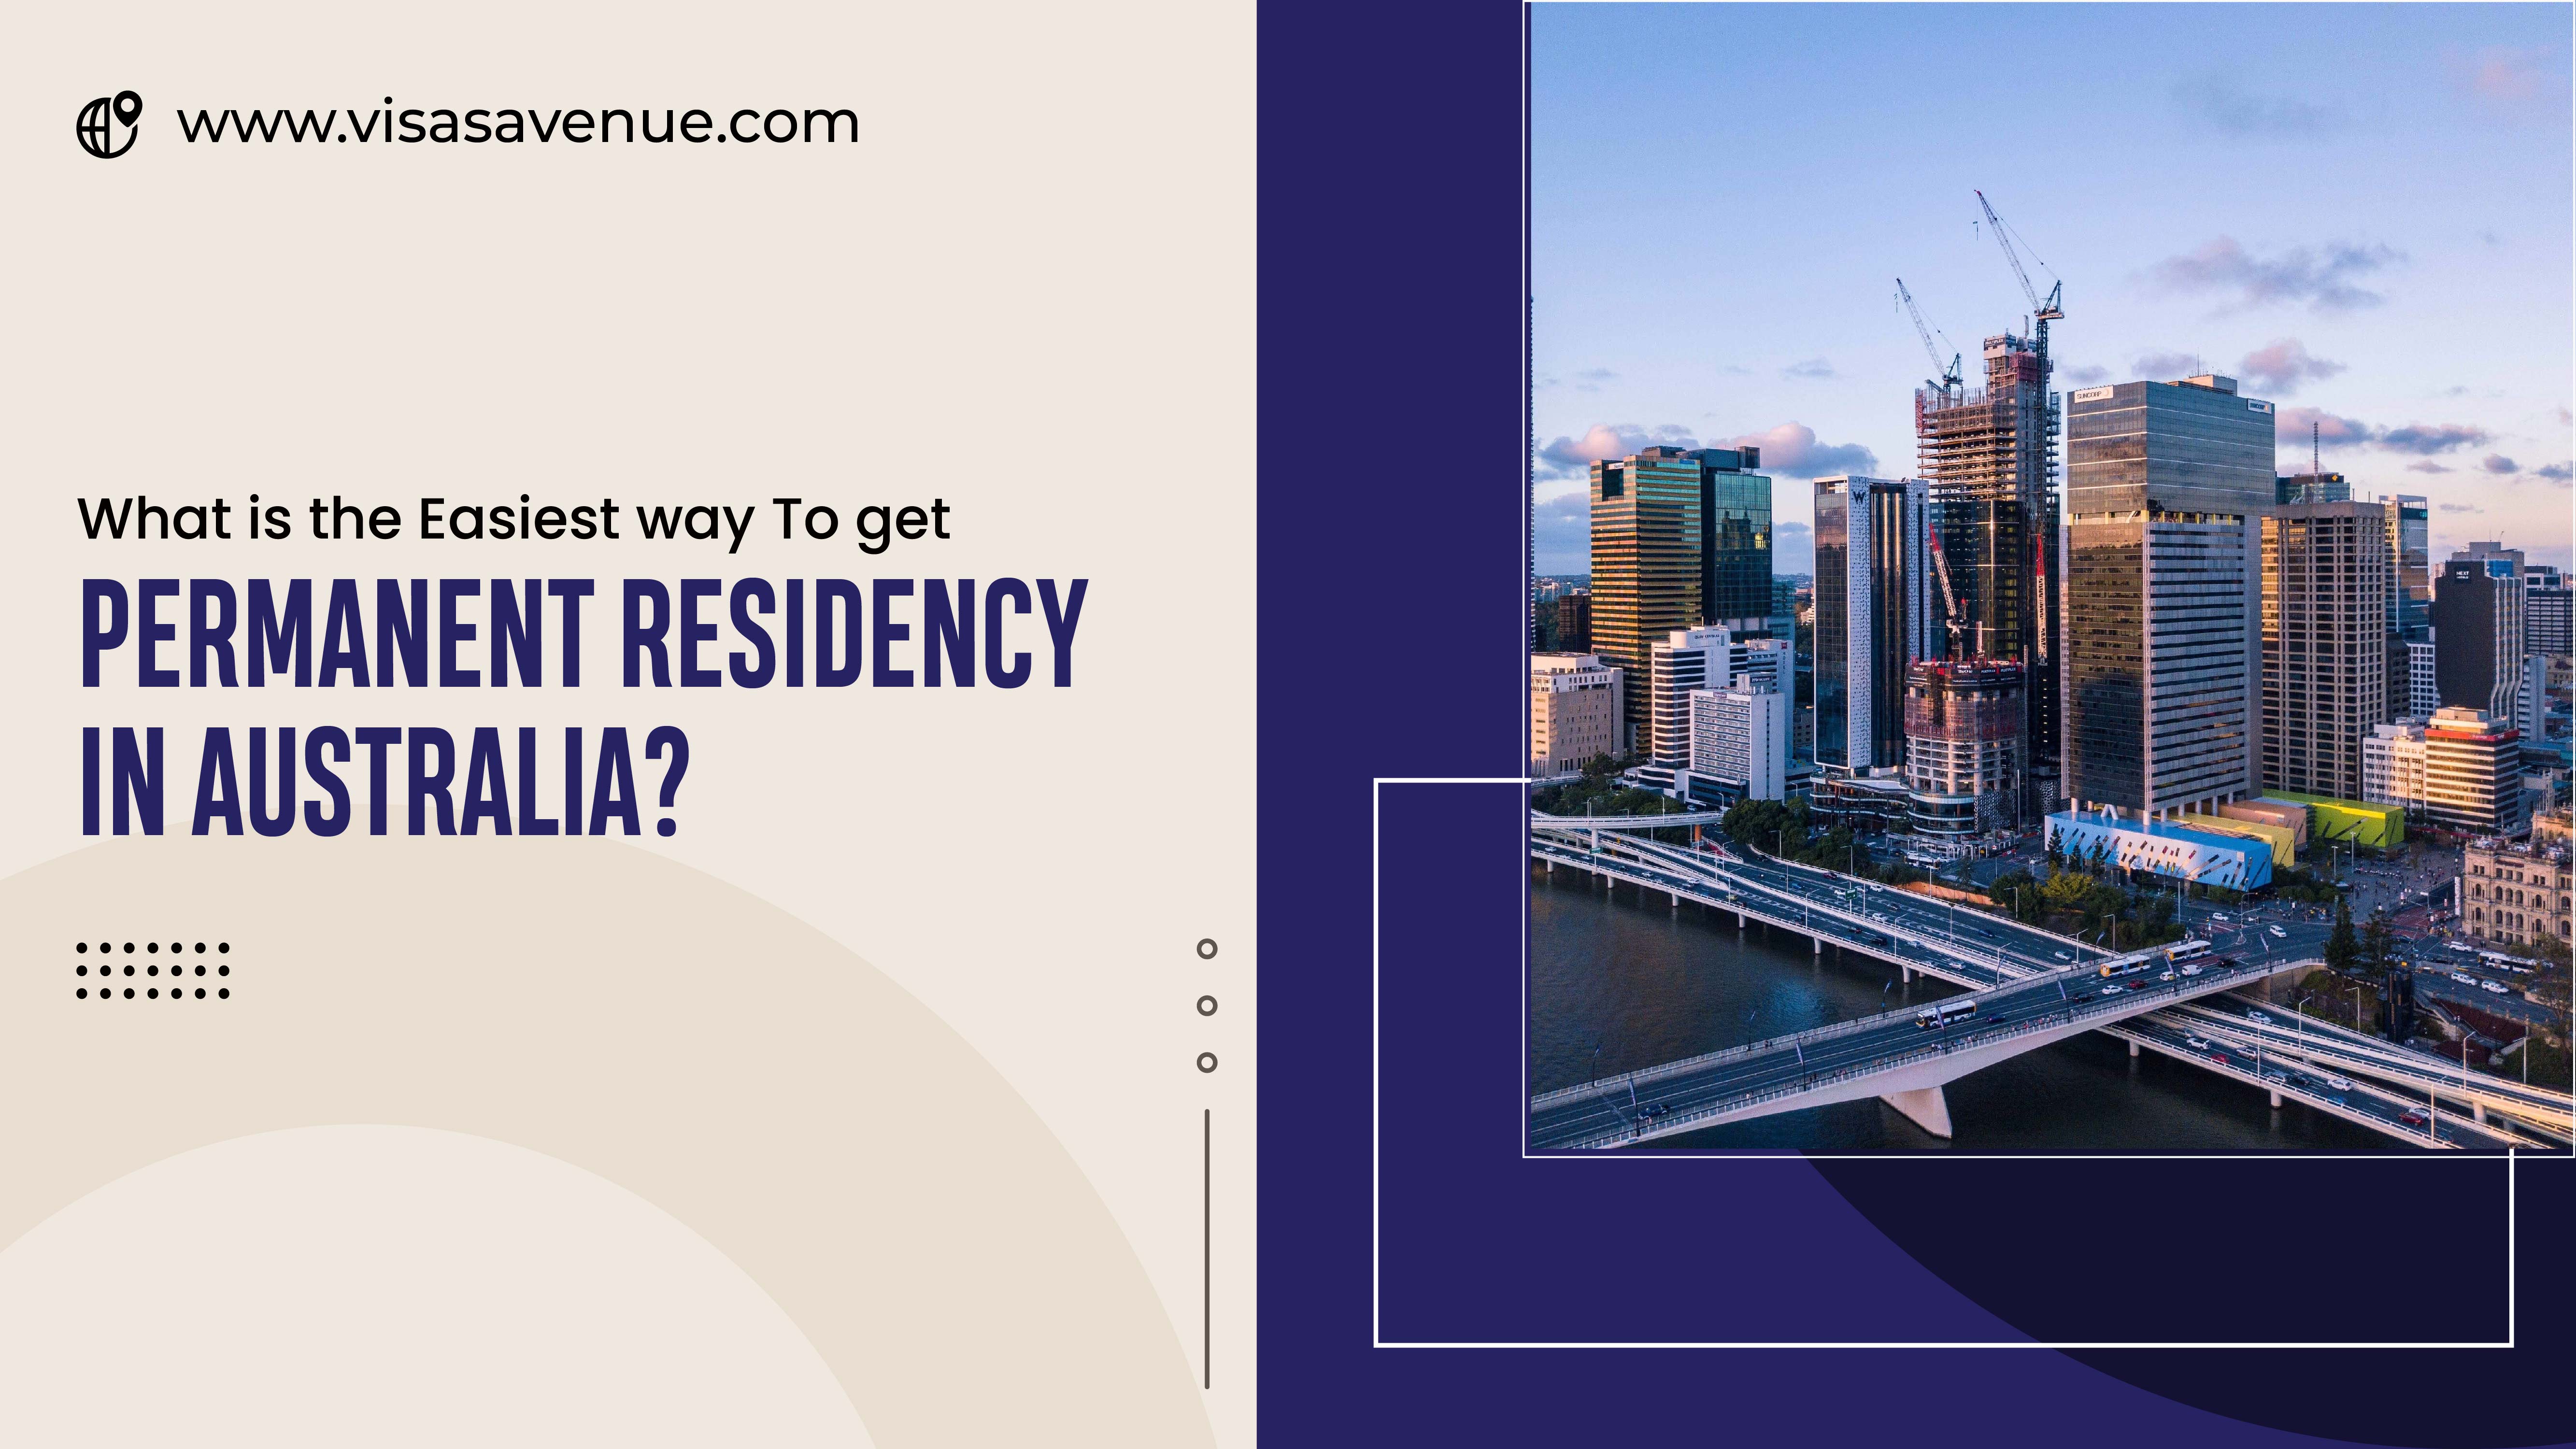 What is the easiest way to get Permanent Residency in Australia?